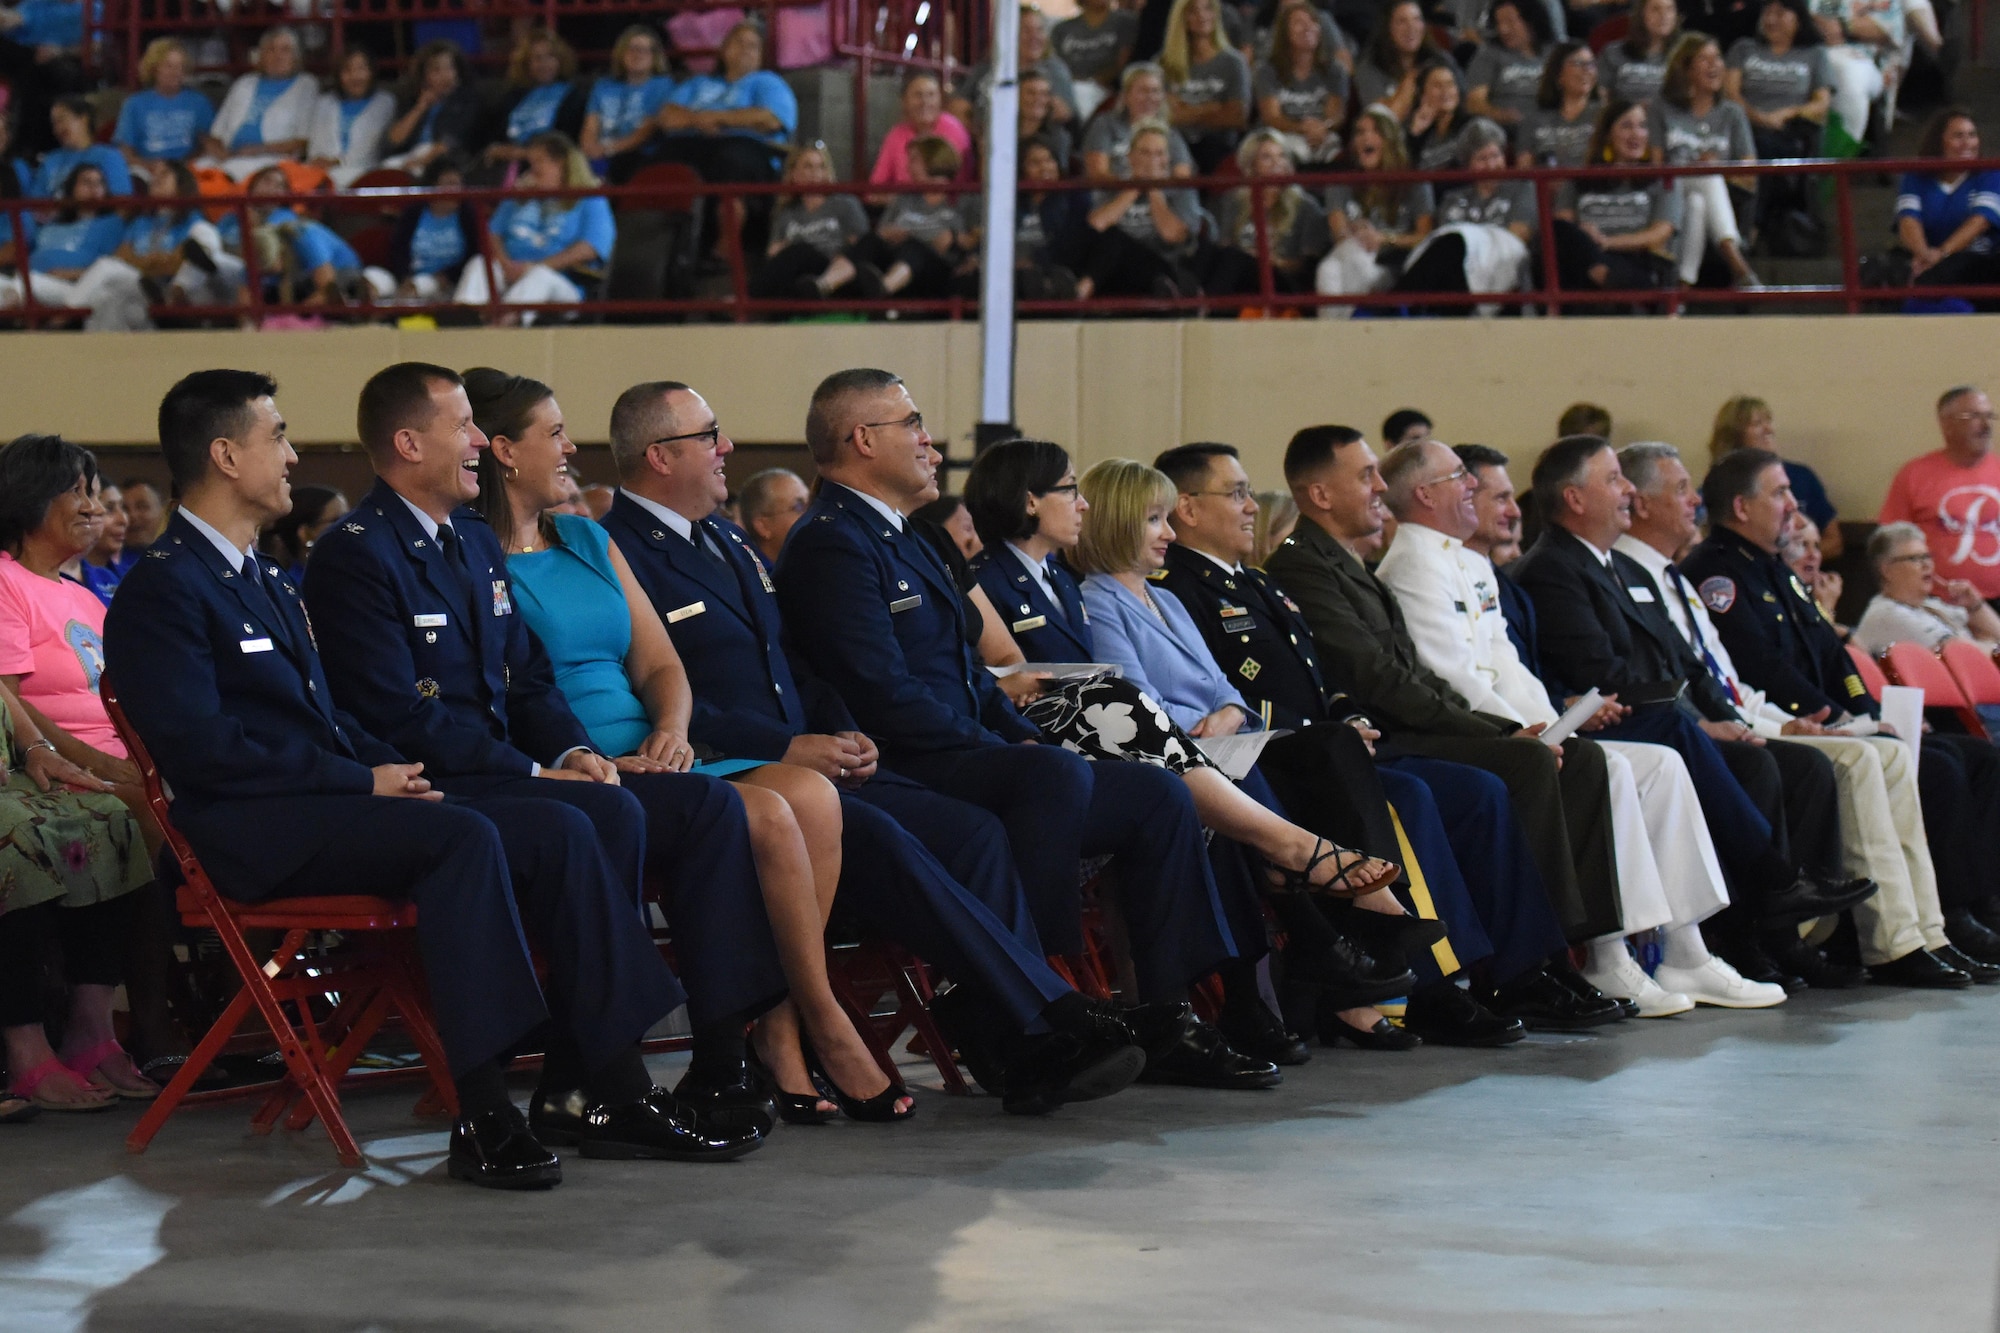 U.S. Air Force Col. Ricky Mills, 17th Training Wing commander, joins the 17th Training Wing, 17th Training Group, 17th Medical Group, 17th Mission Support Group, Army, Marine Corps and Navy leaders at the annual convocation of the San Angelo Independent School District at the Foster Communications Colosseum, San Angelo, Texas, Aug. 15, 2017.